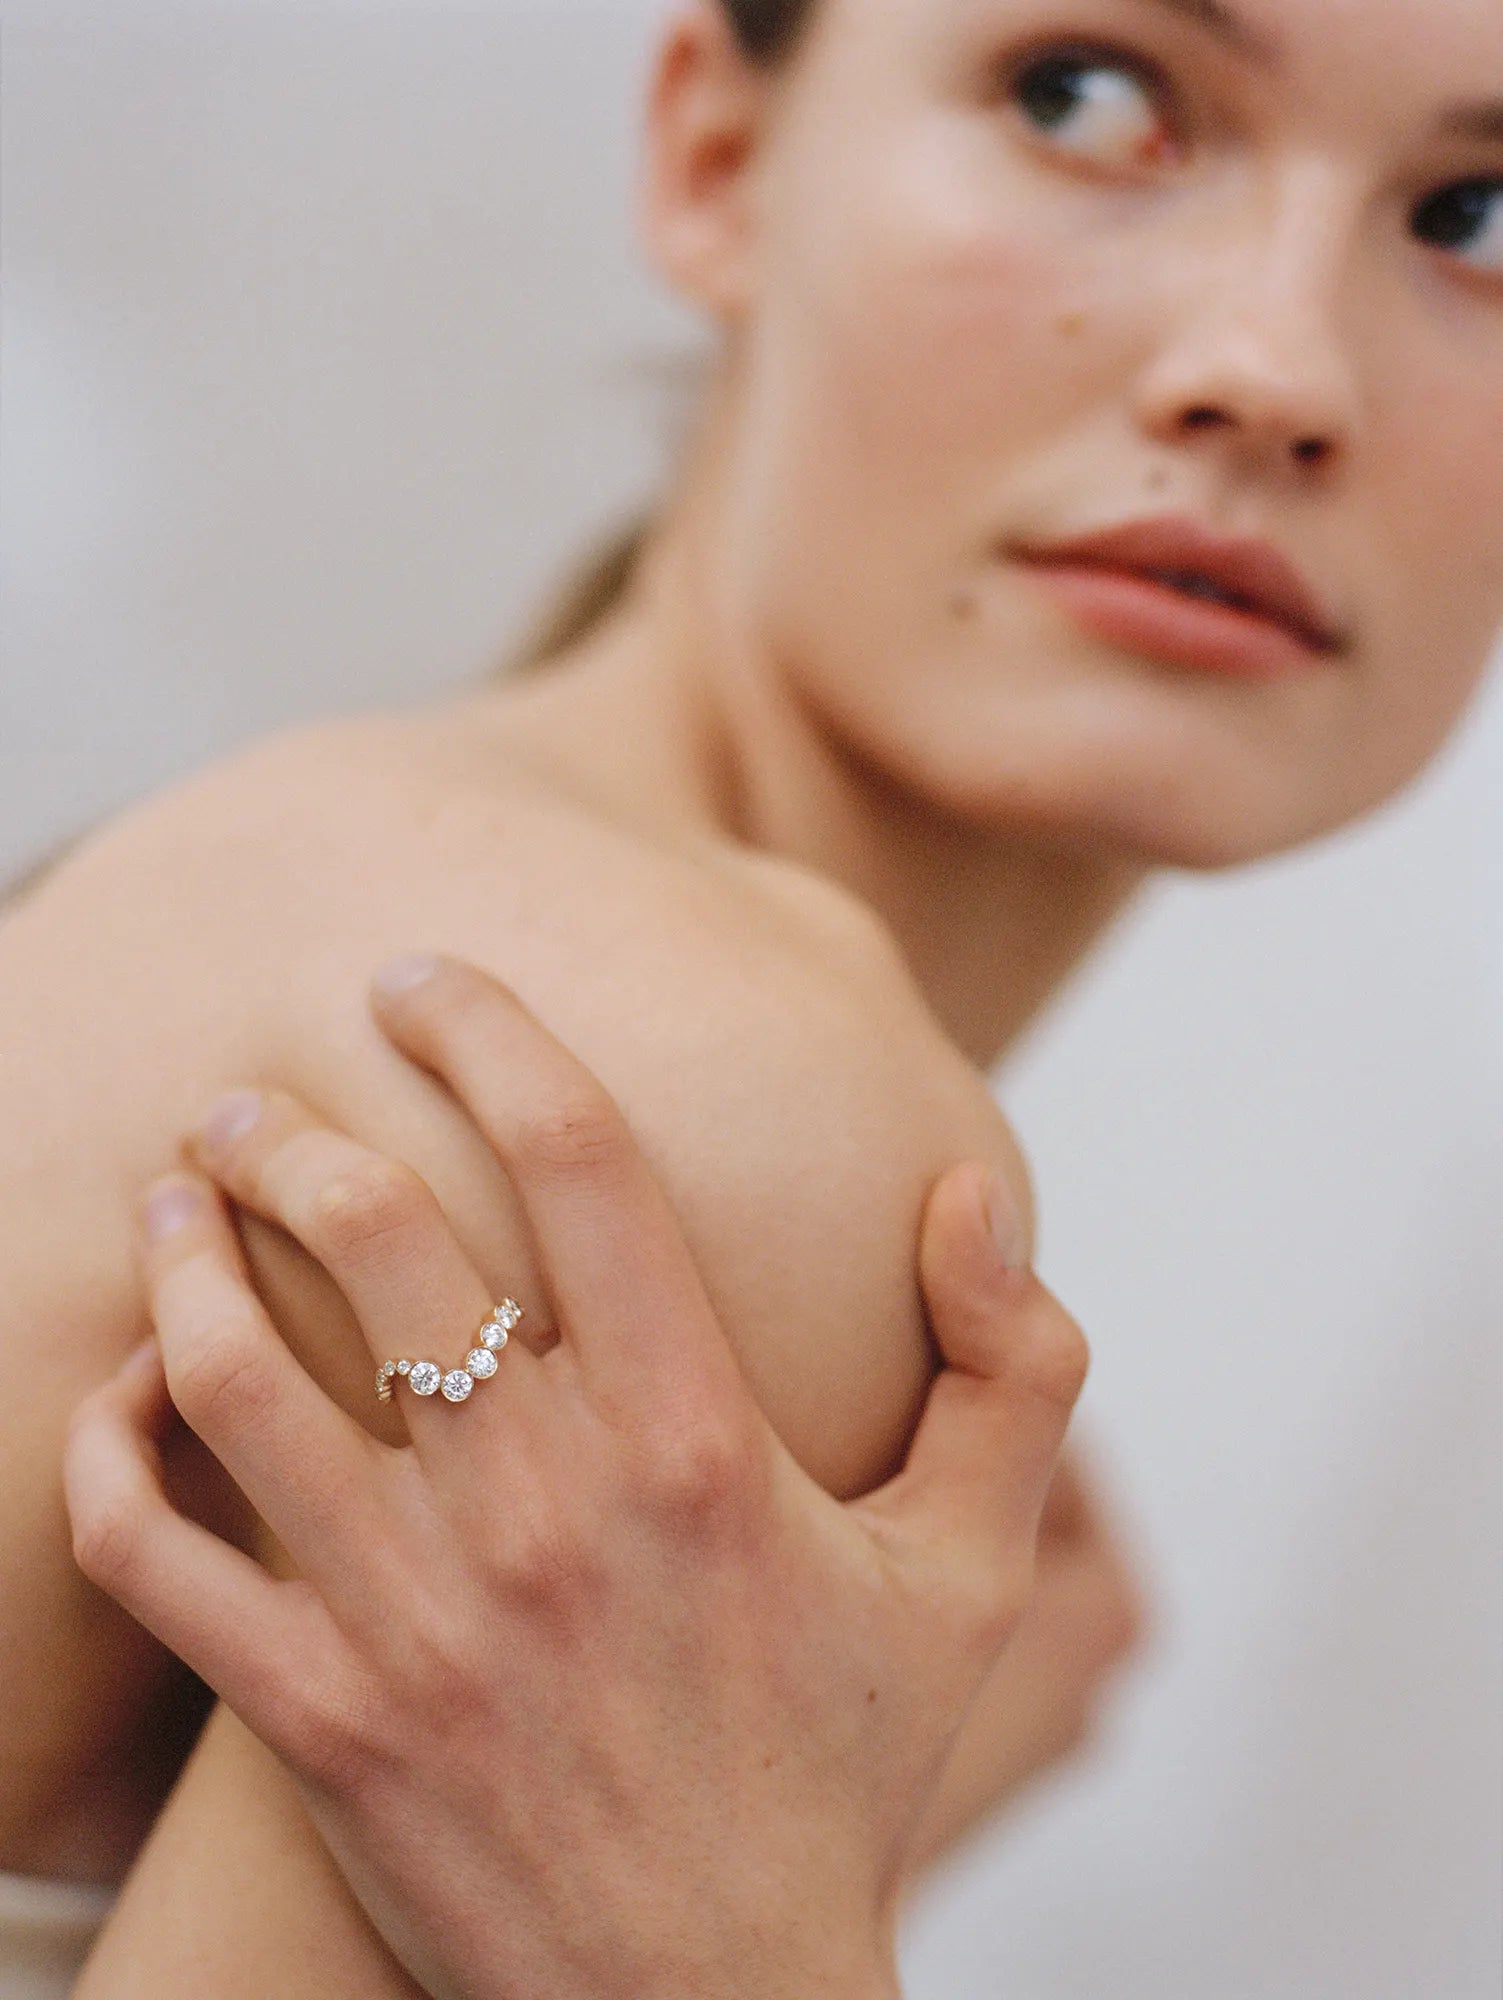 Model wearing Ensemble Ocean diamond ring from the Autumn and Winter 2019 collection